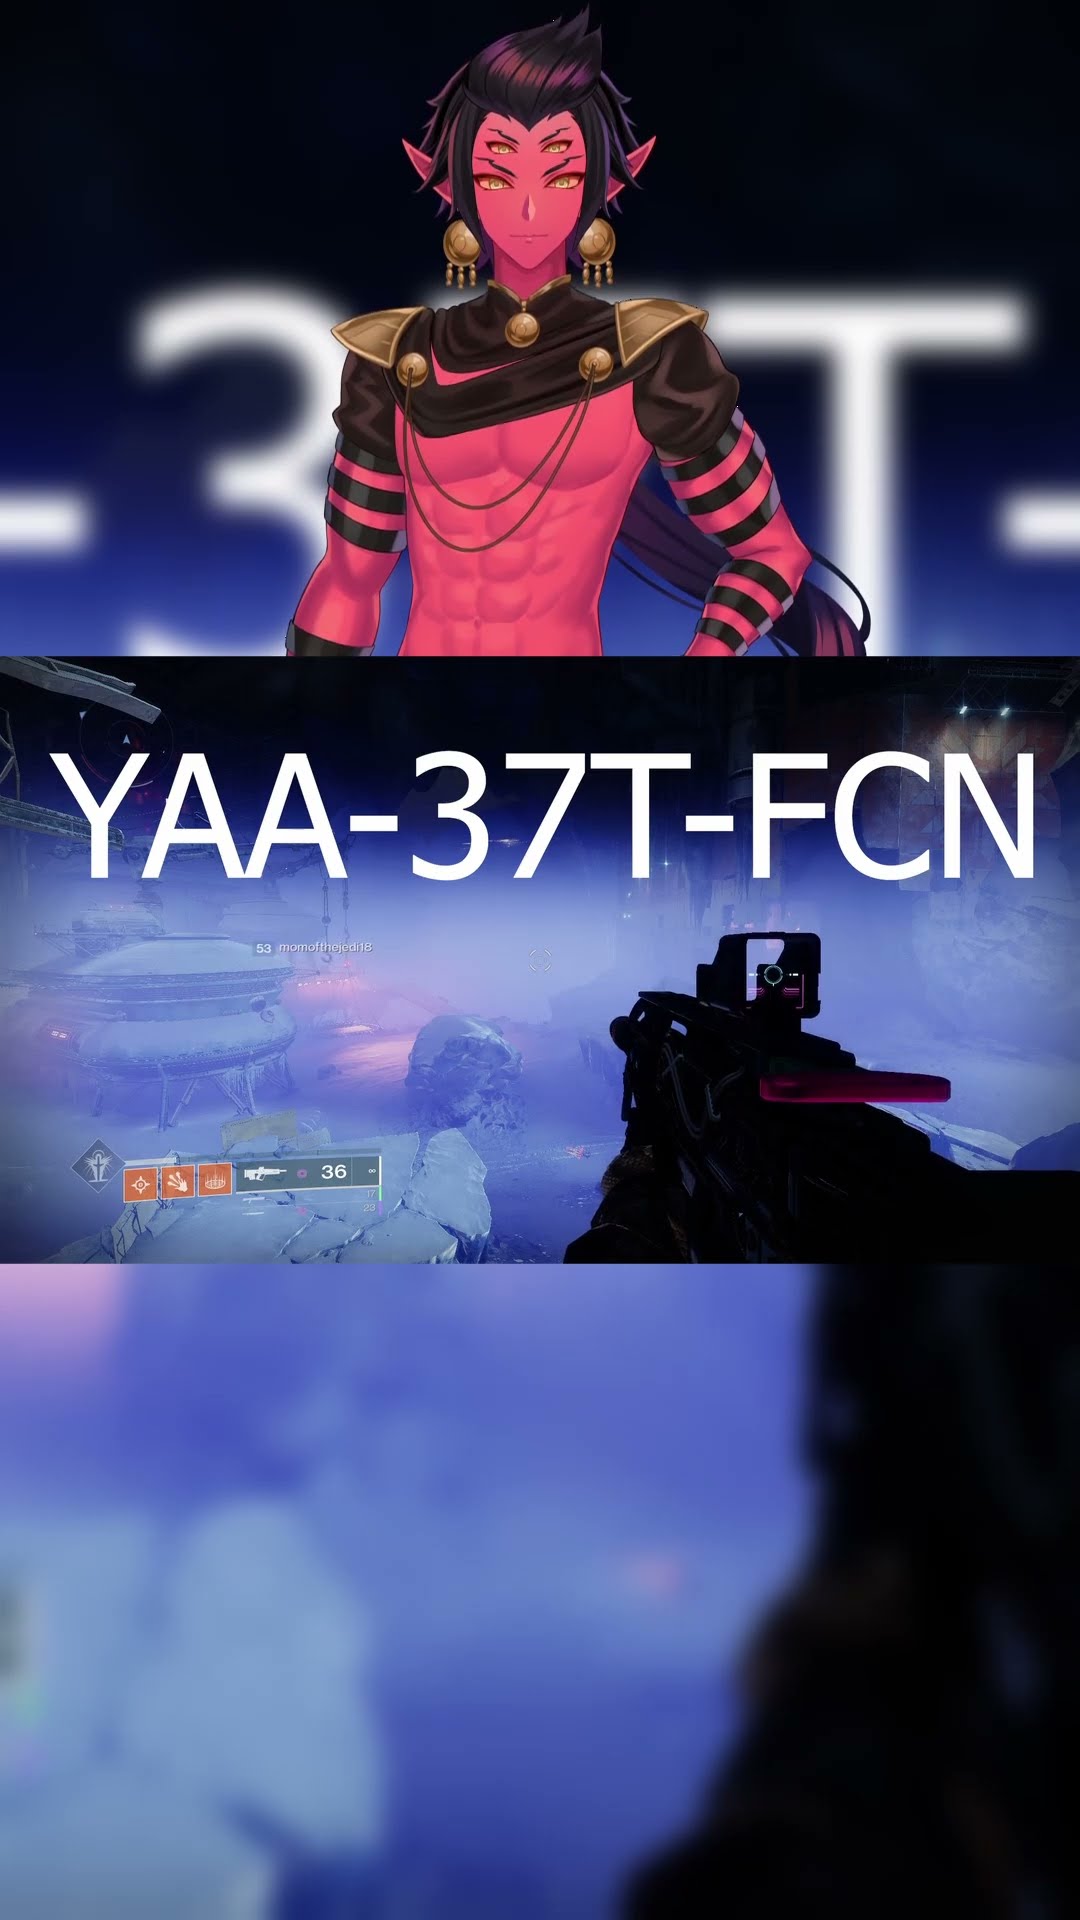 THERE ARE TWO EMBLEM: (YAA-37T-FCN) and (J6P-9YH-LLP) #shorts #destiny2